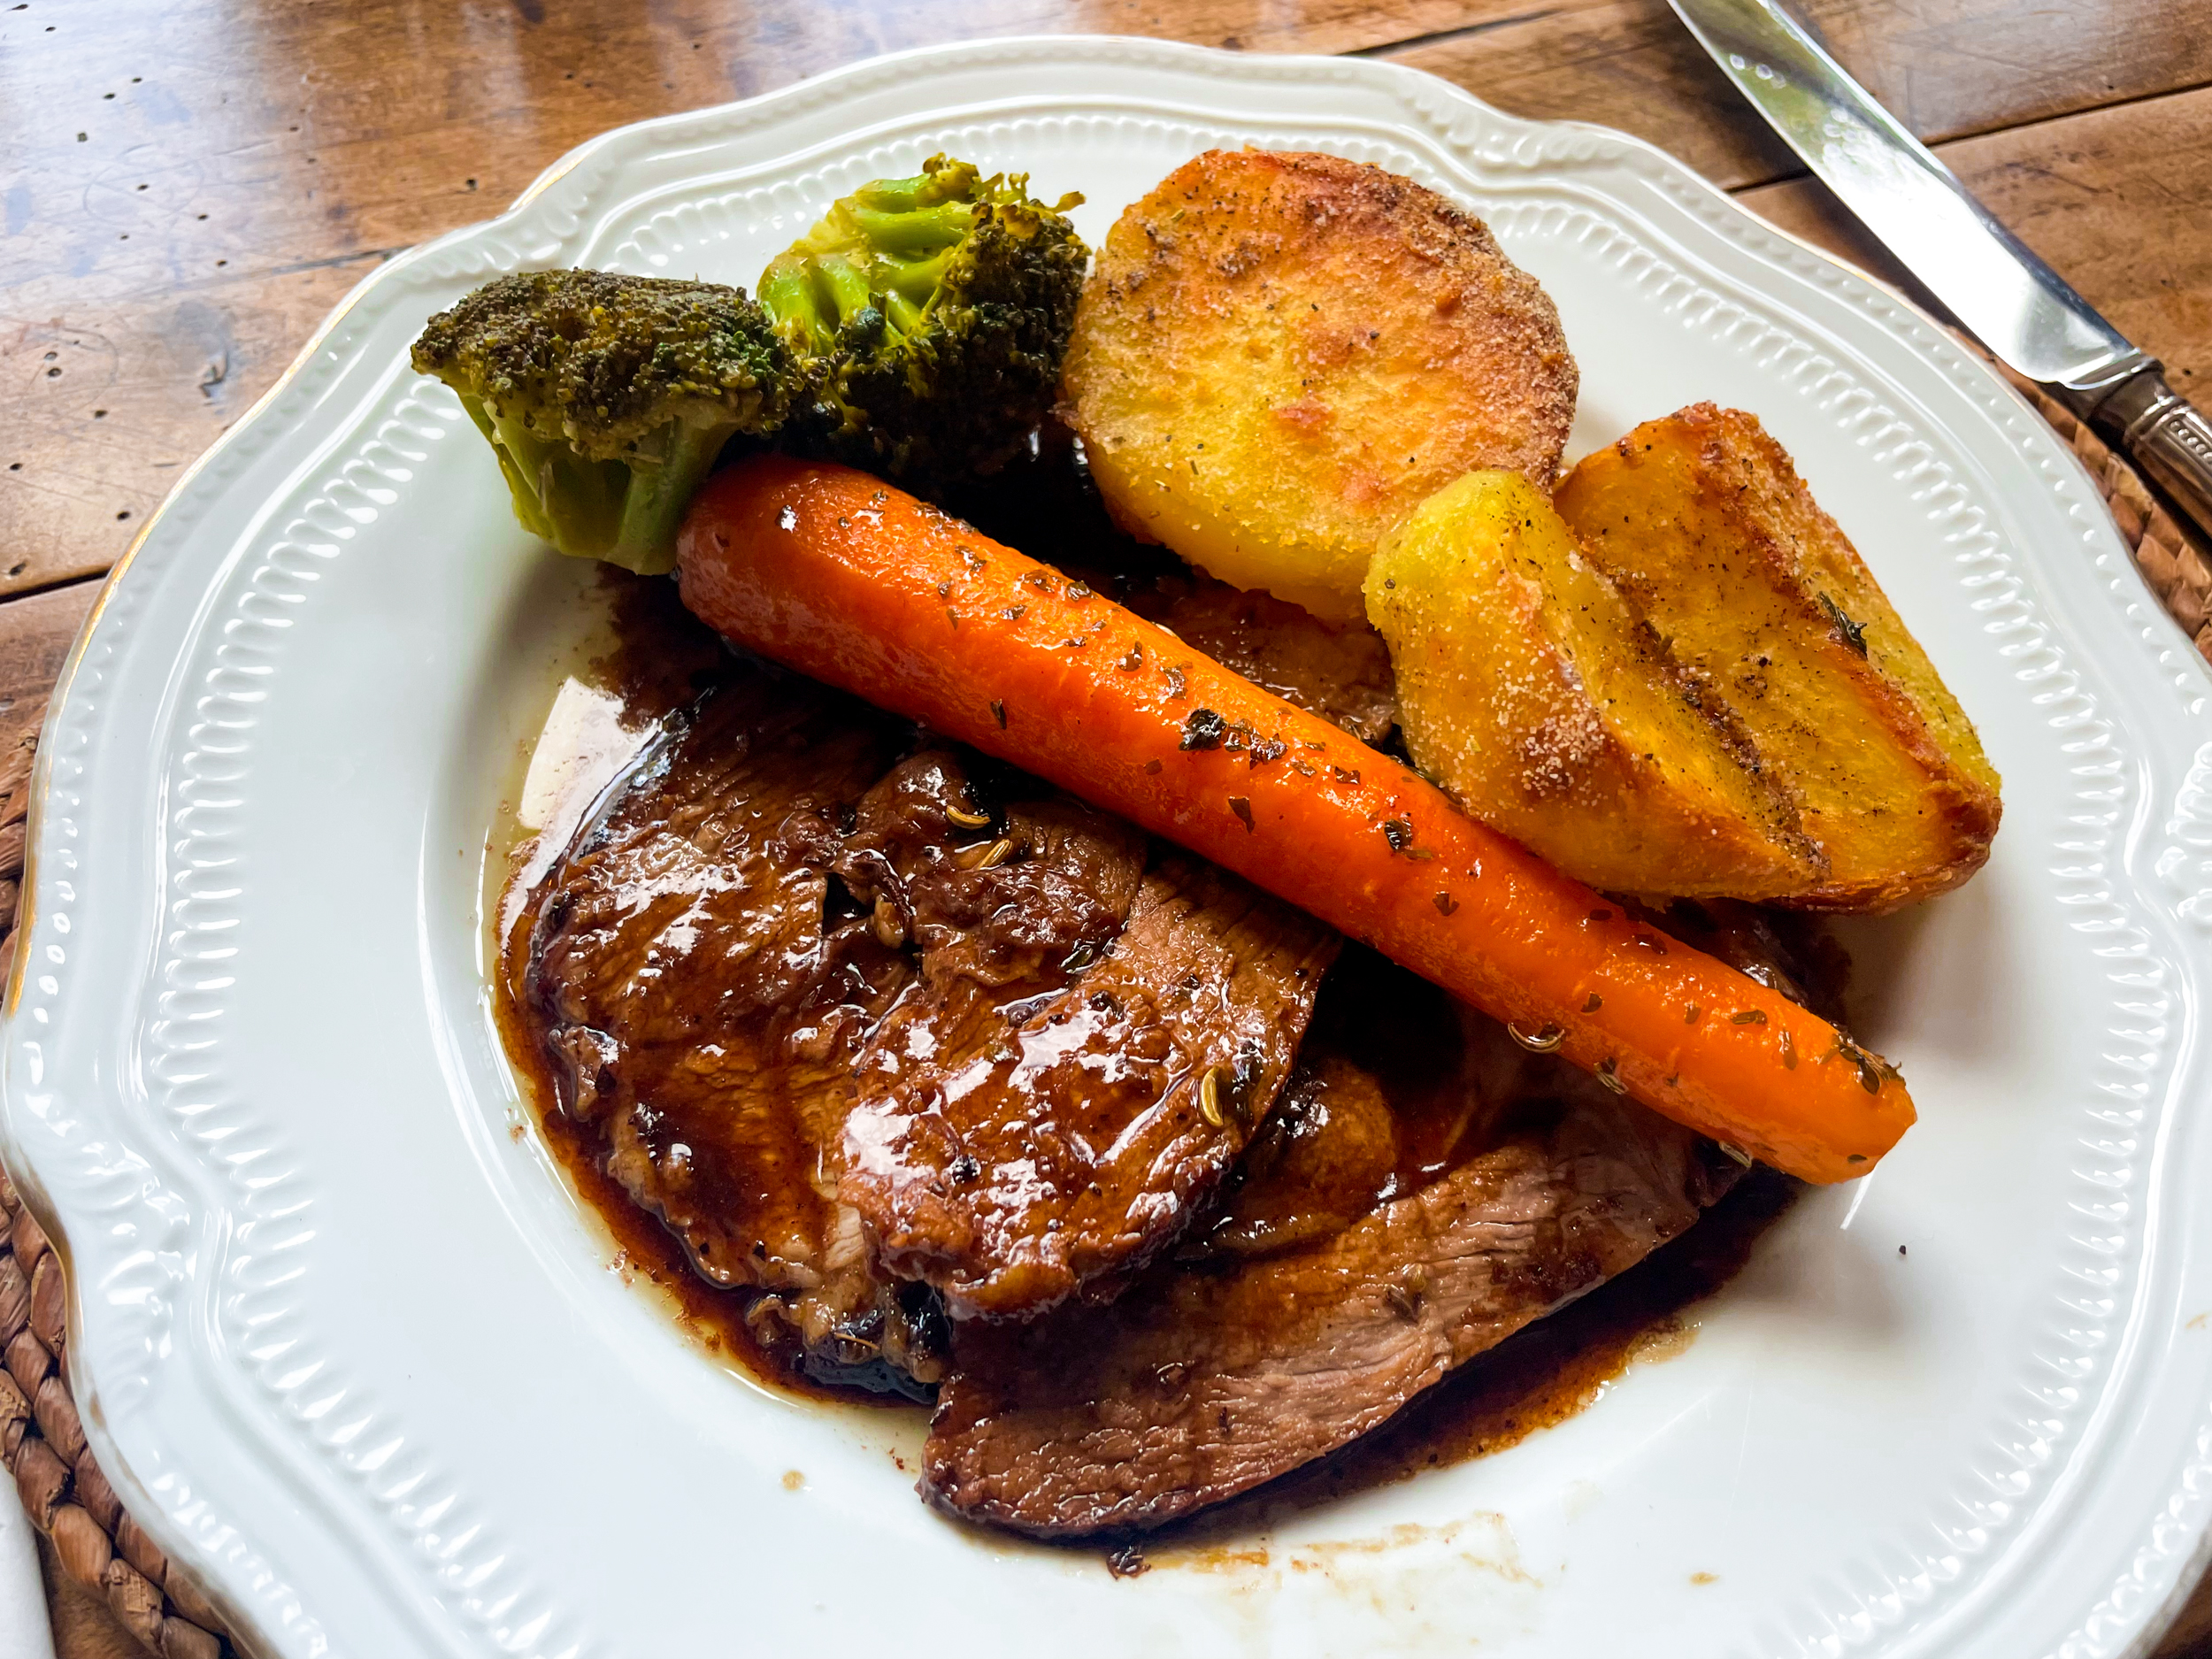 A fancy china plate is topped with a high-end version of a roast dinner. Tender slices of beef have been doused in gravy; roasted carrots, broccoli, and potatoes are resting on top of it.